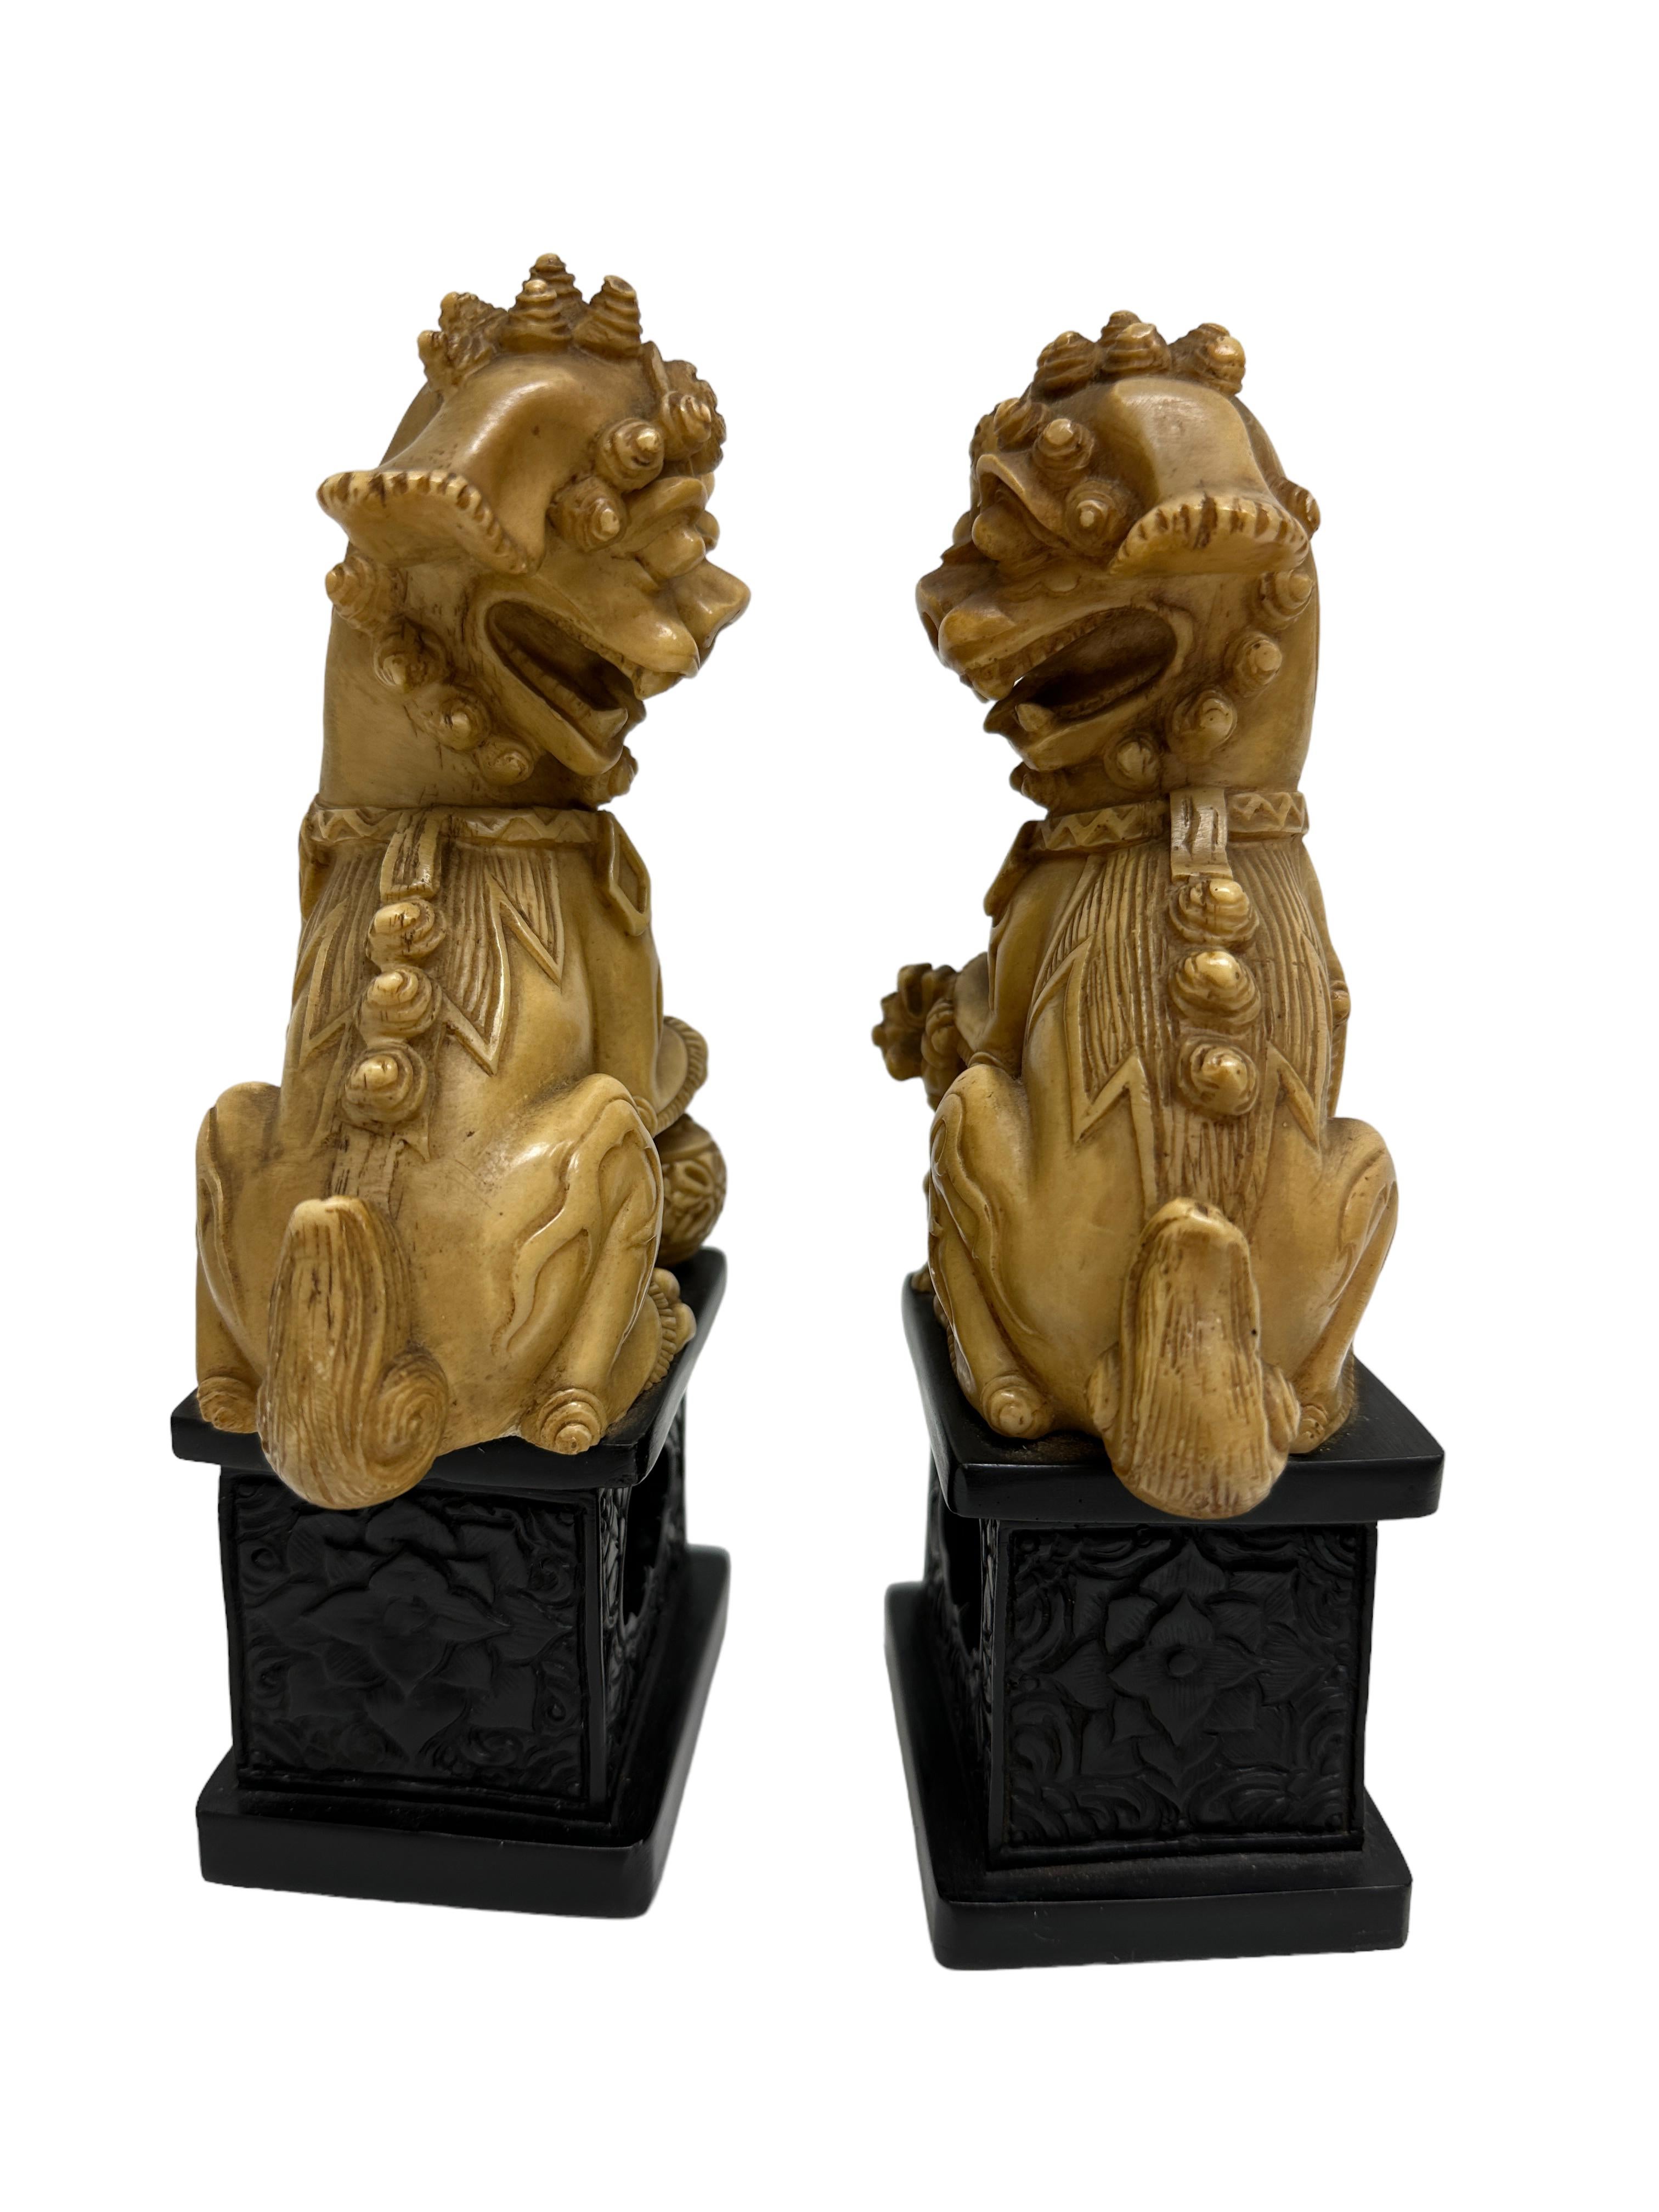 Chinese Unique Pair of Decorative Foo Dogs Temple Lion Bookends Sculptures For Sale